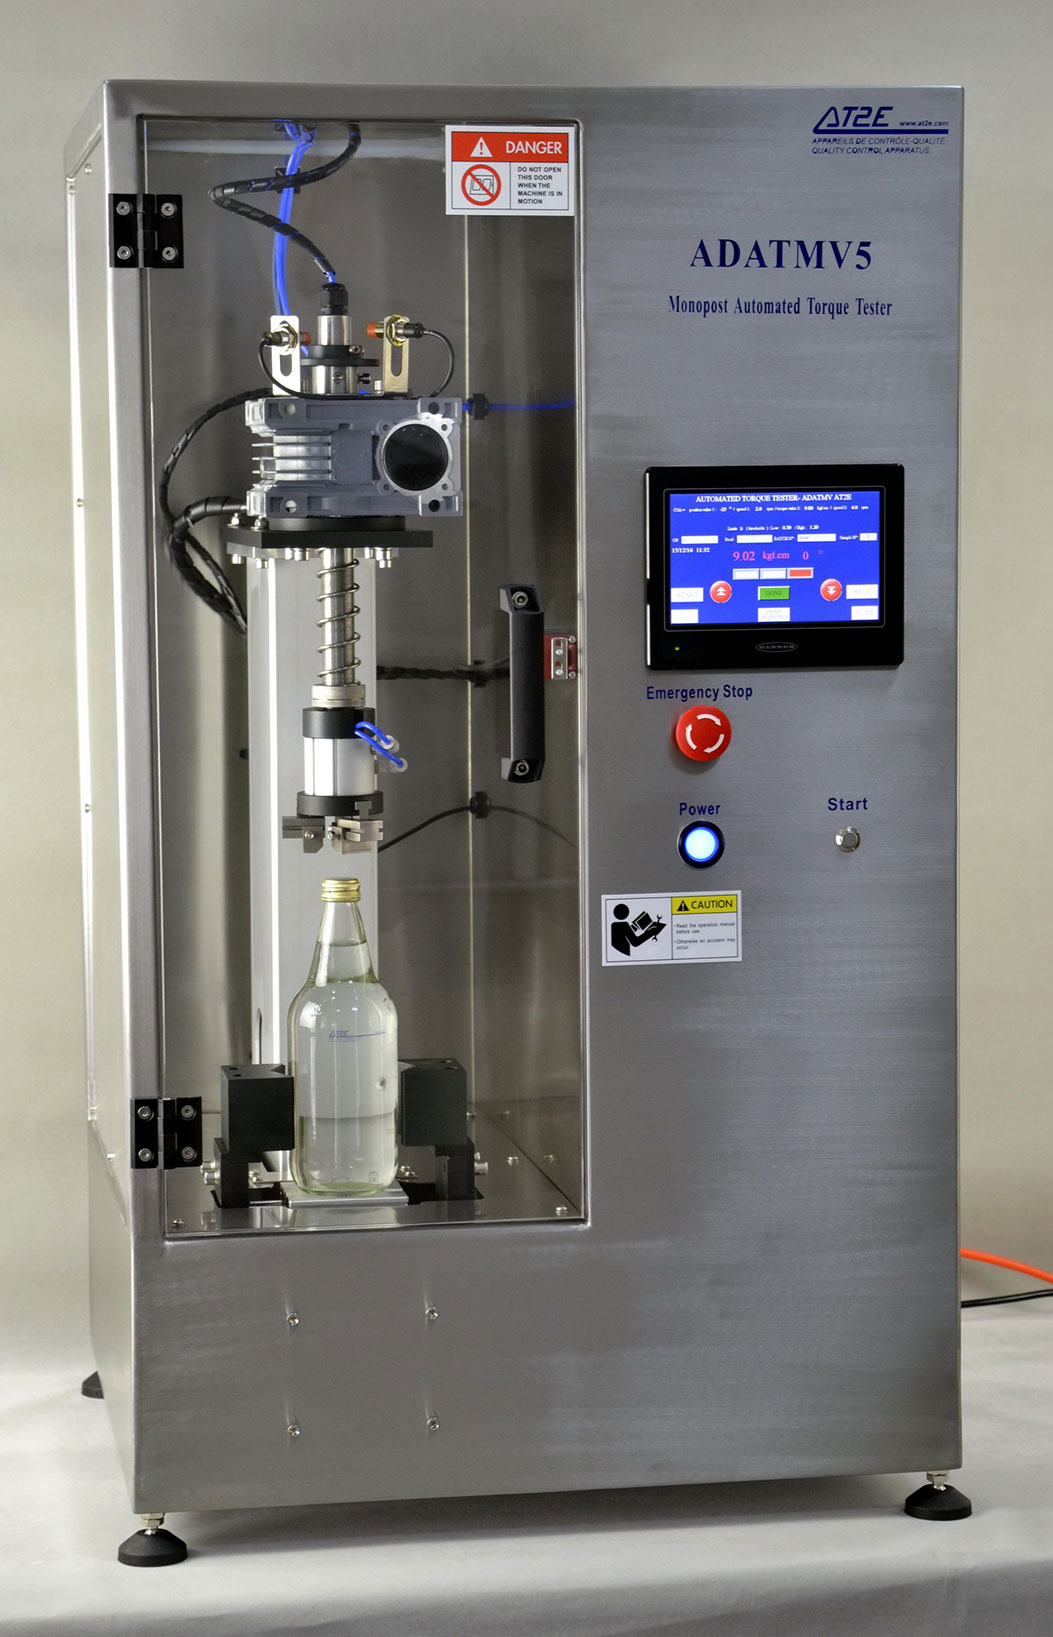 ADATMV5 – Monopost Automated Torque Tester (Comply with the requirements of FDA – CFR 21-11)-image